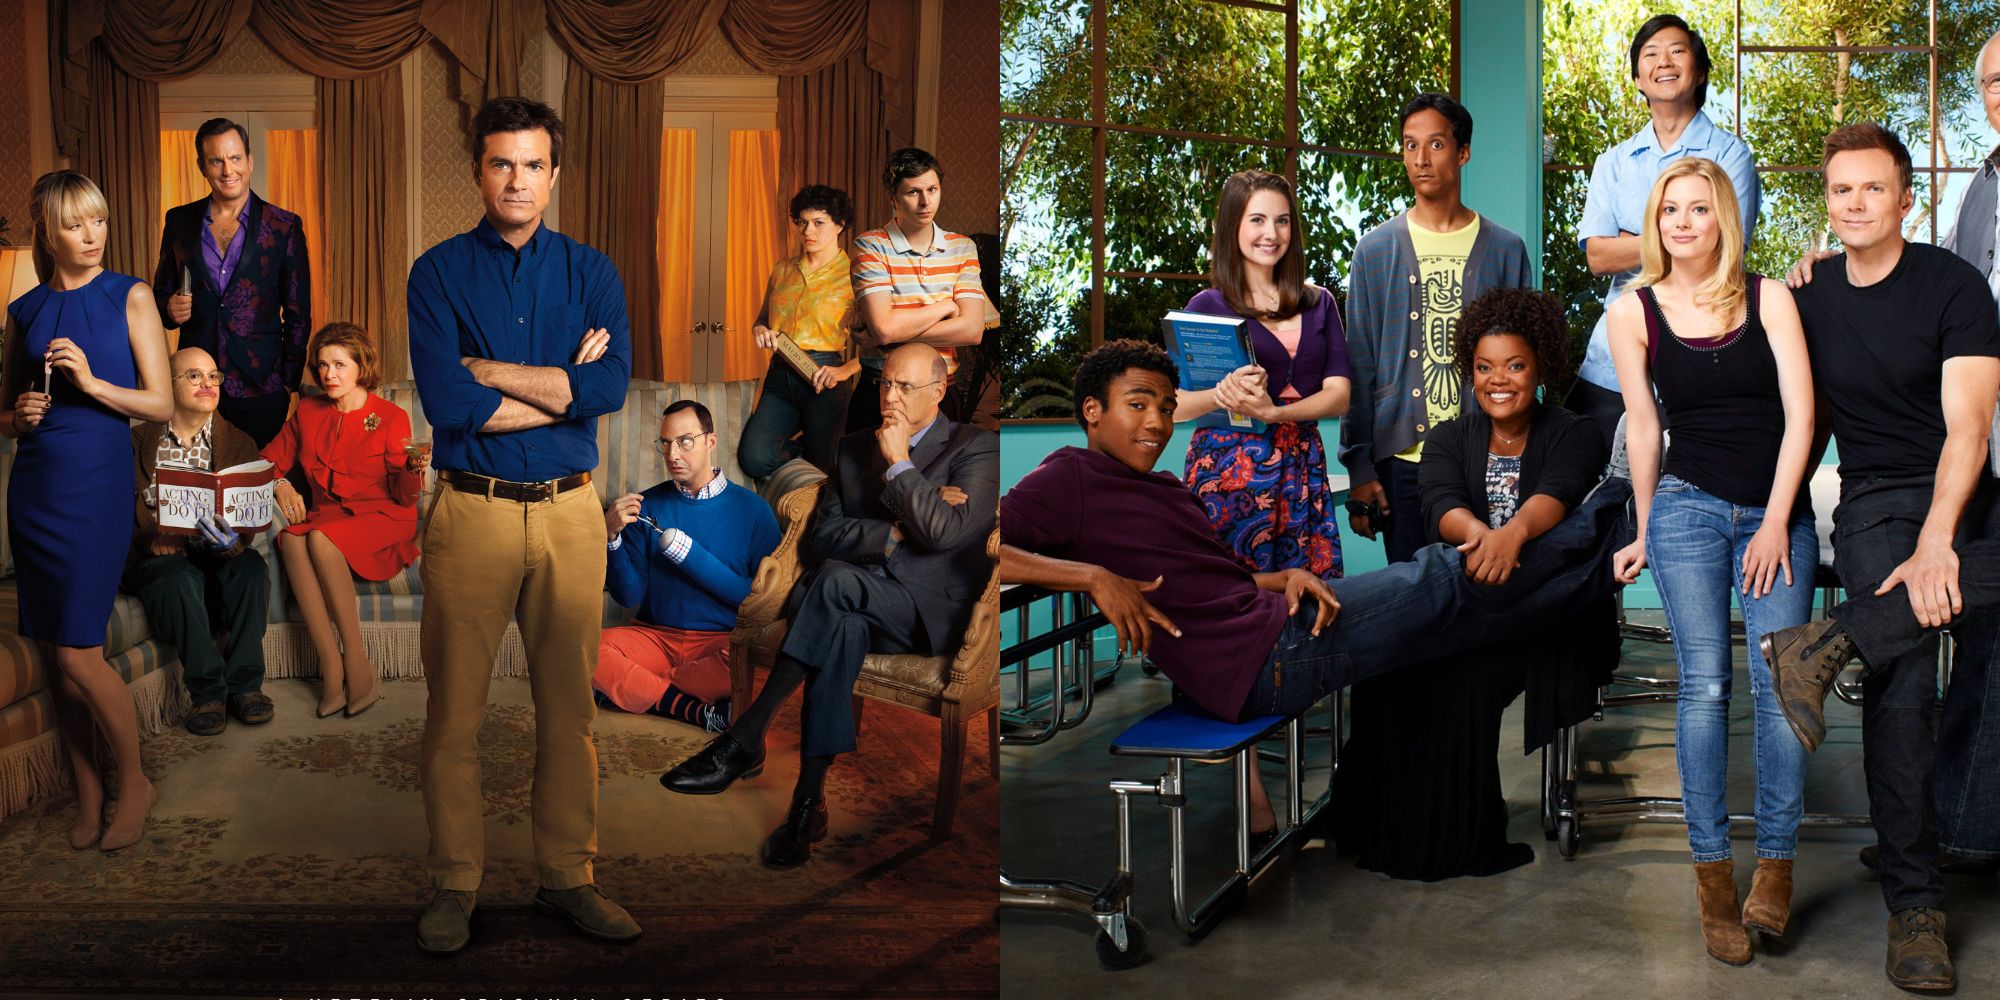 Split image showing the cast of Arrested Development and Community.